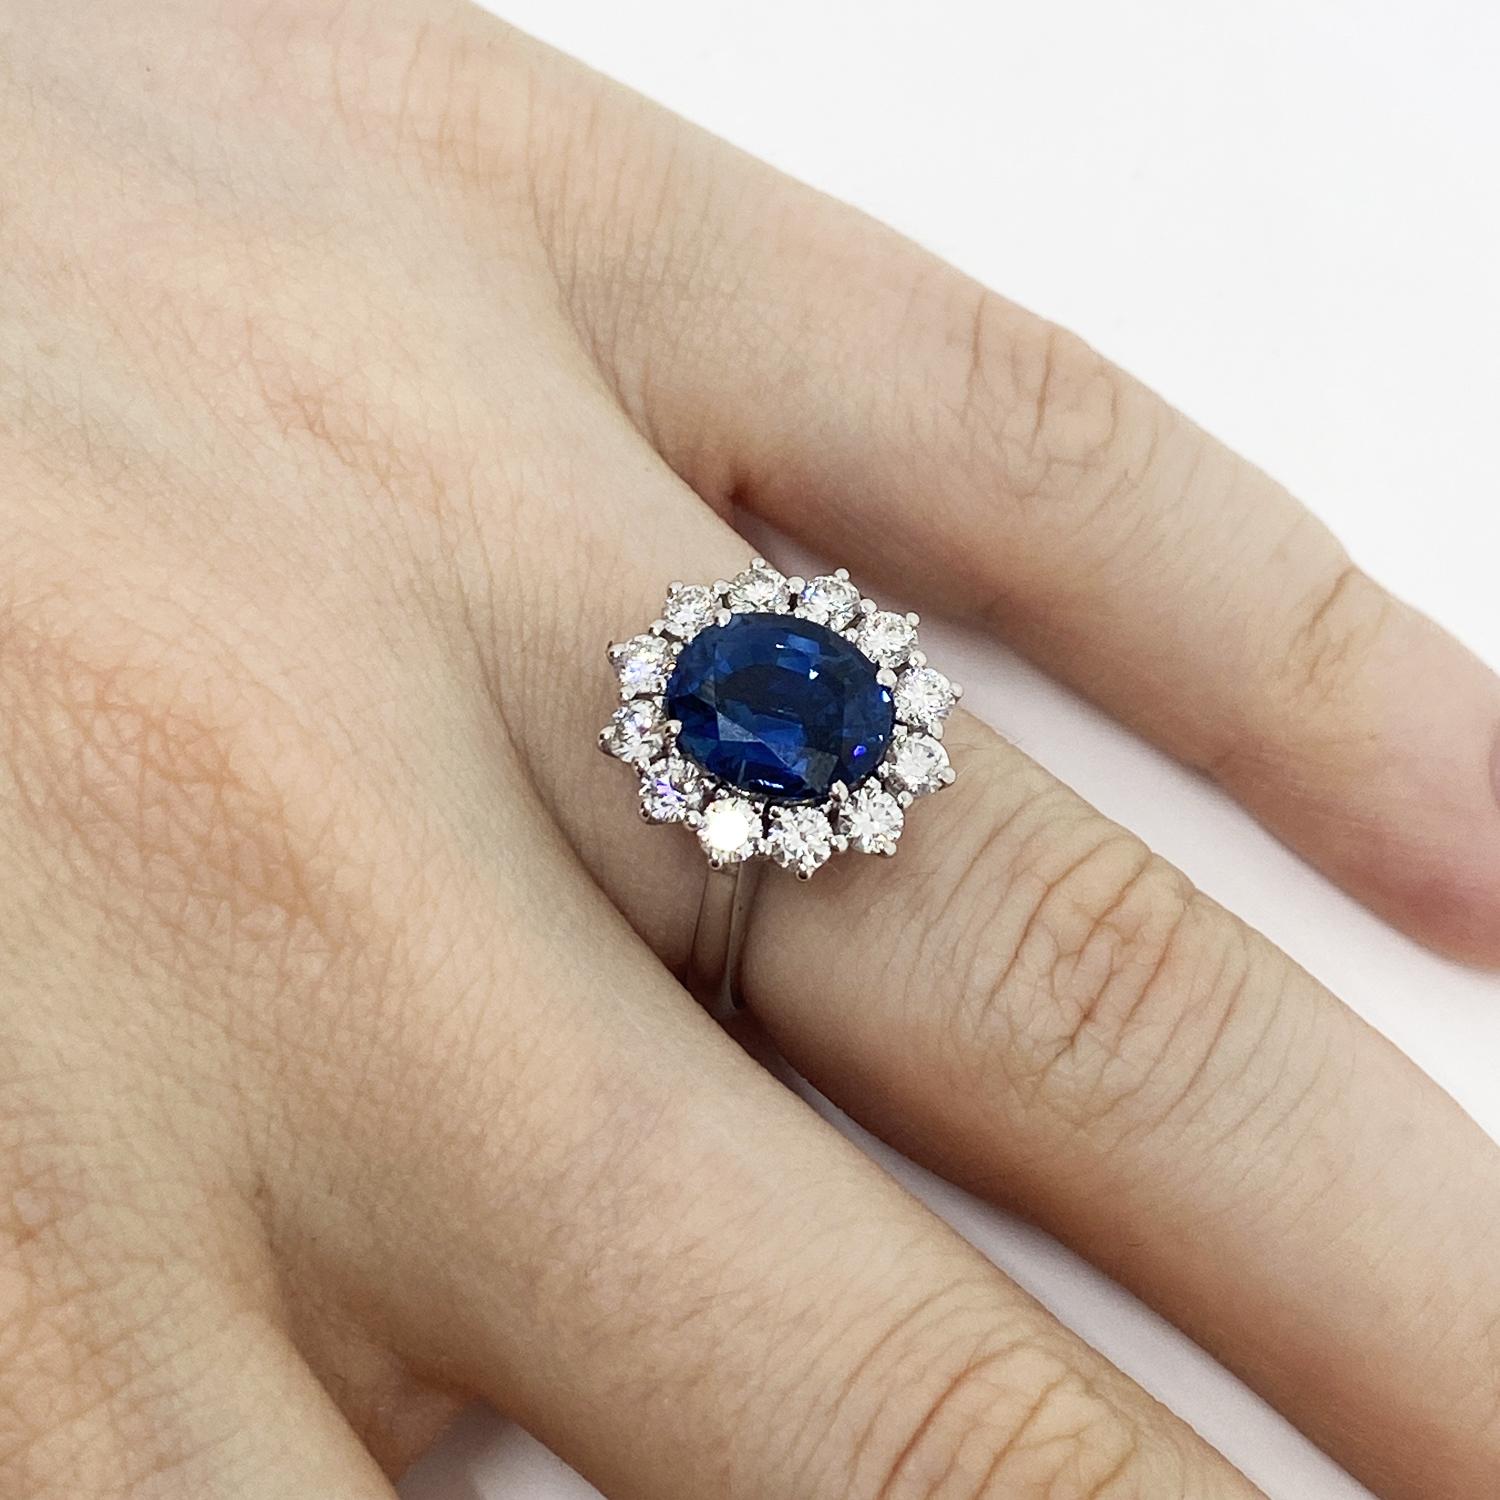 Ring made of 18kt white gold with natural brilliant-cut white diamonds for ct.0.88 and oval blue sapphire for ct.3.52
-------------------------------------------------

Important Note : In order to speed up the publishing process of our vast